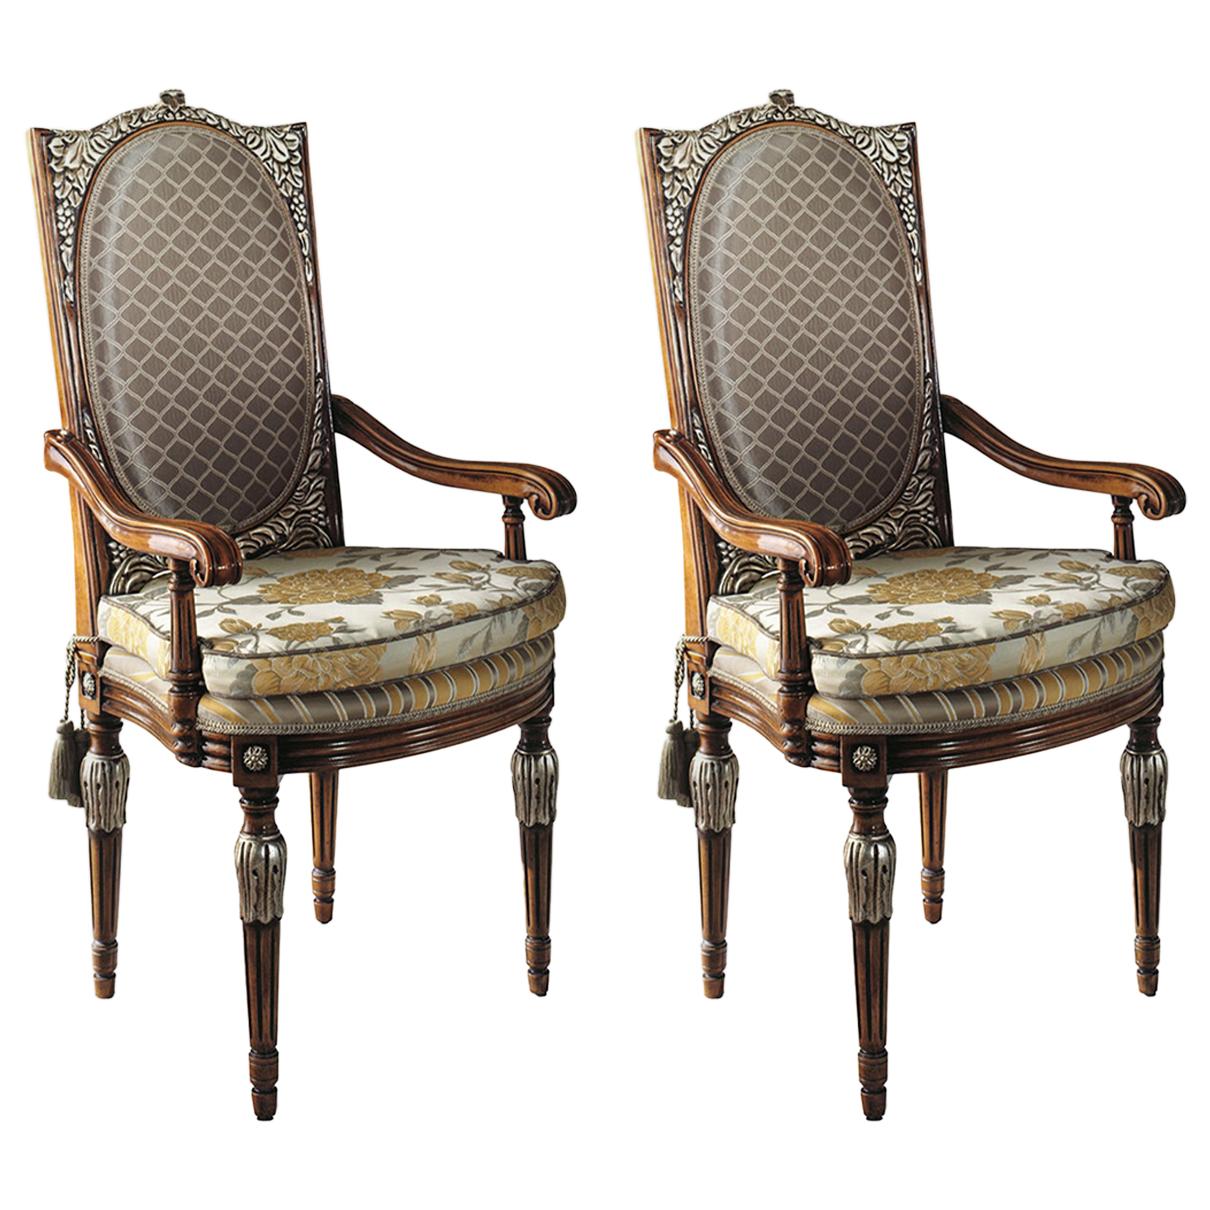 Set of 2 Upholstered Dining Armchairs with Silver Inlays